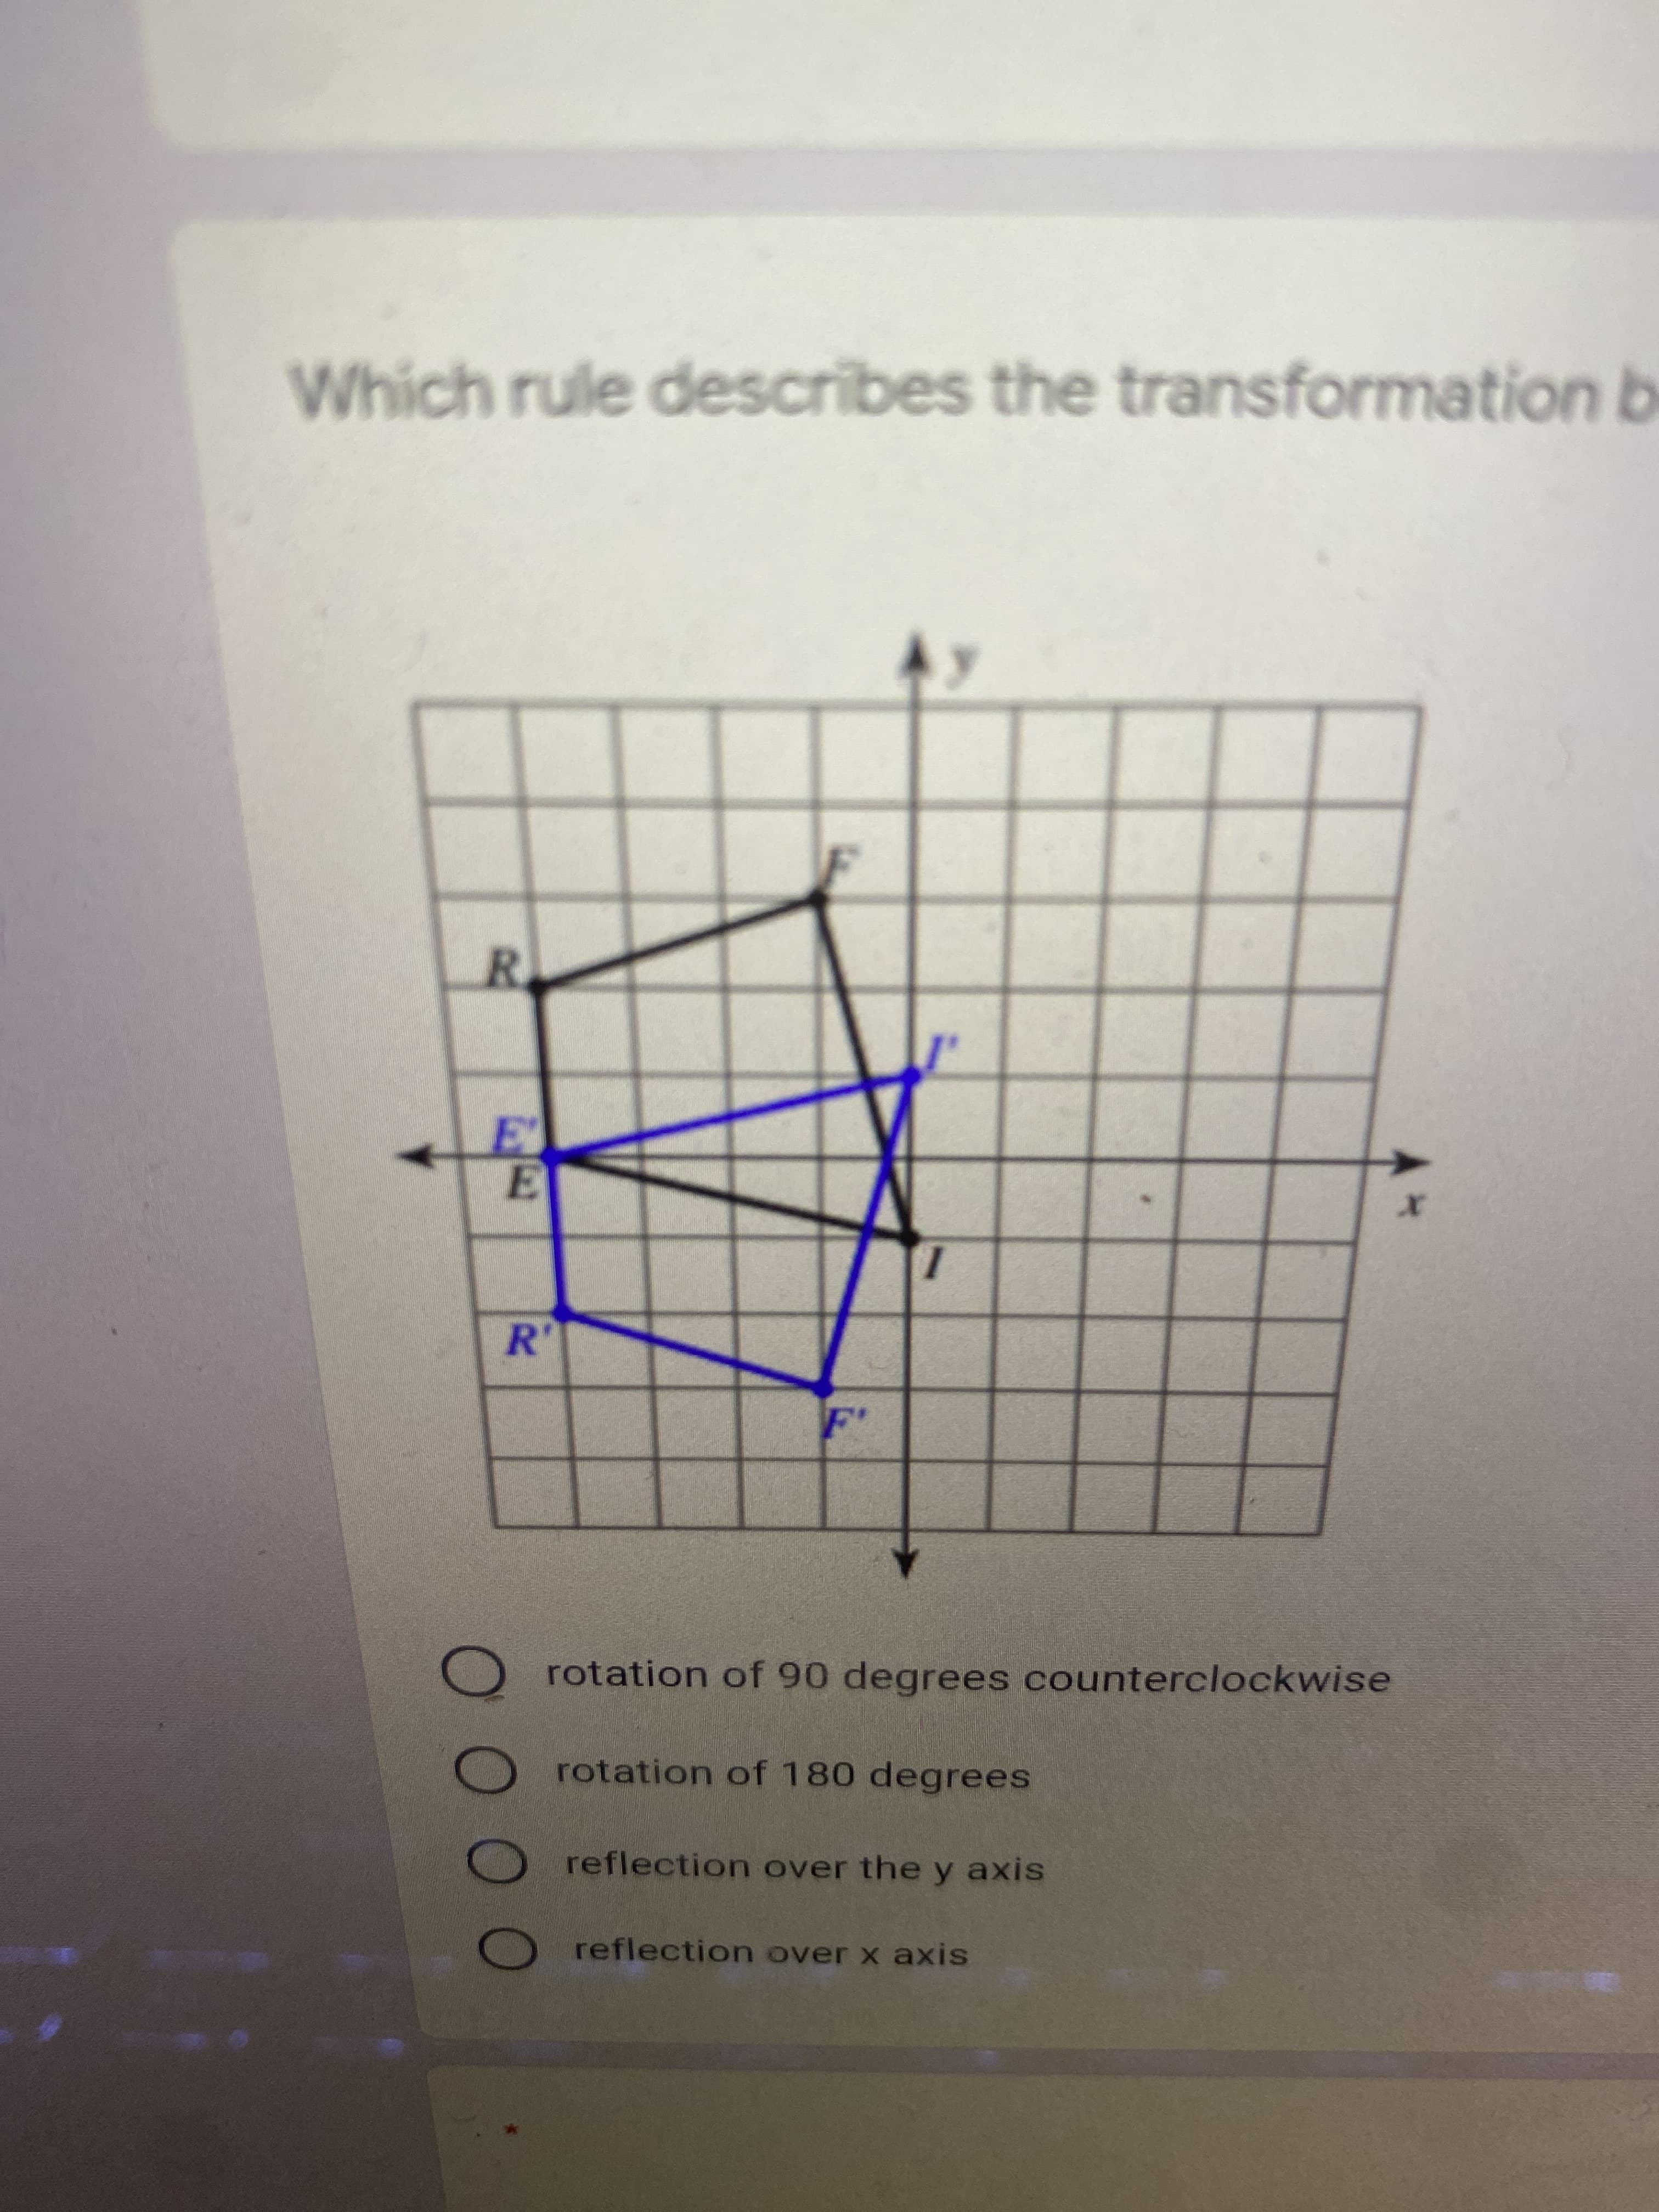 Which rule describes the transformation b
